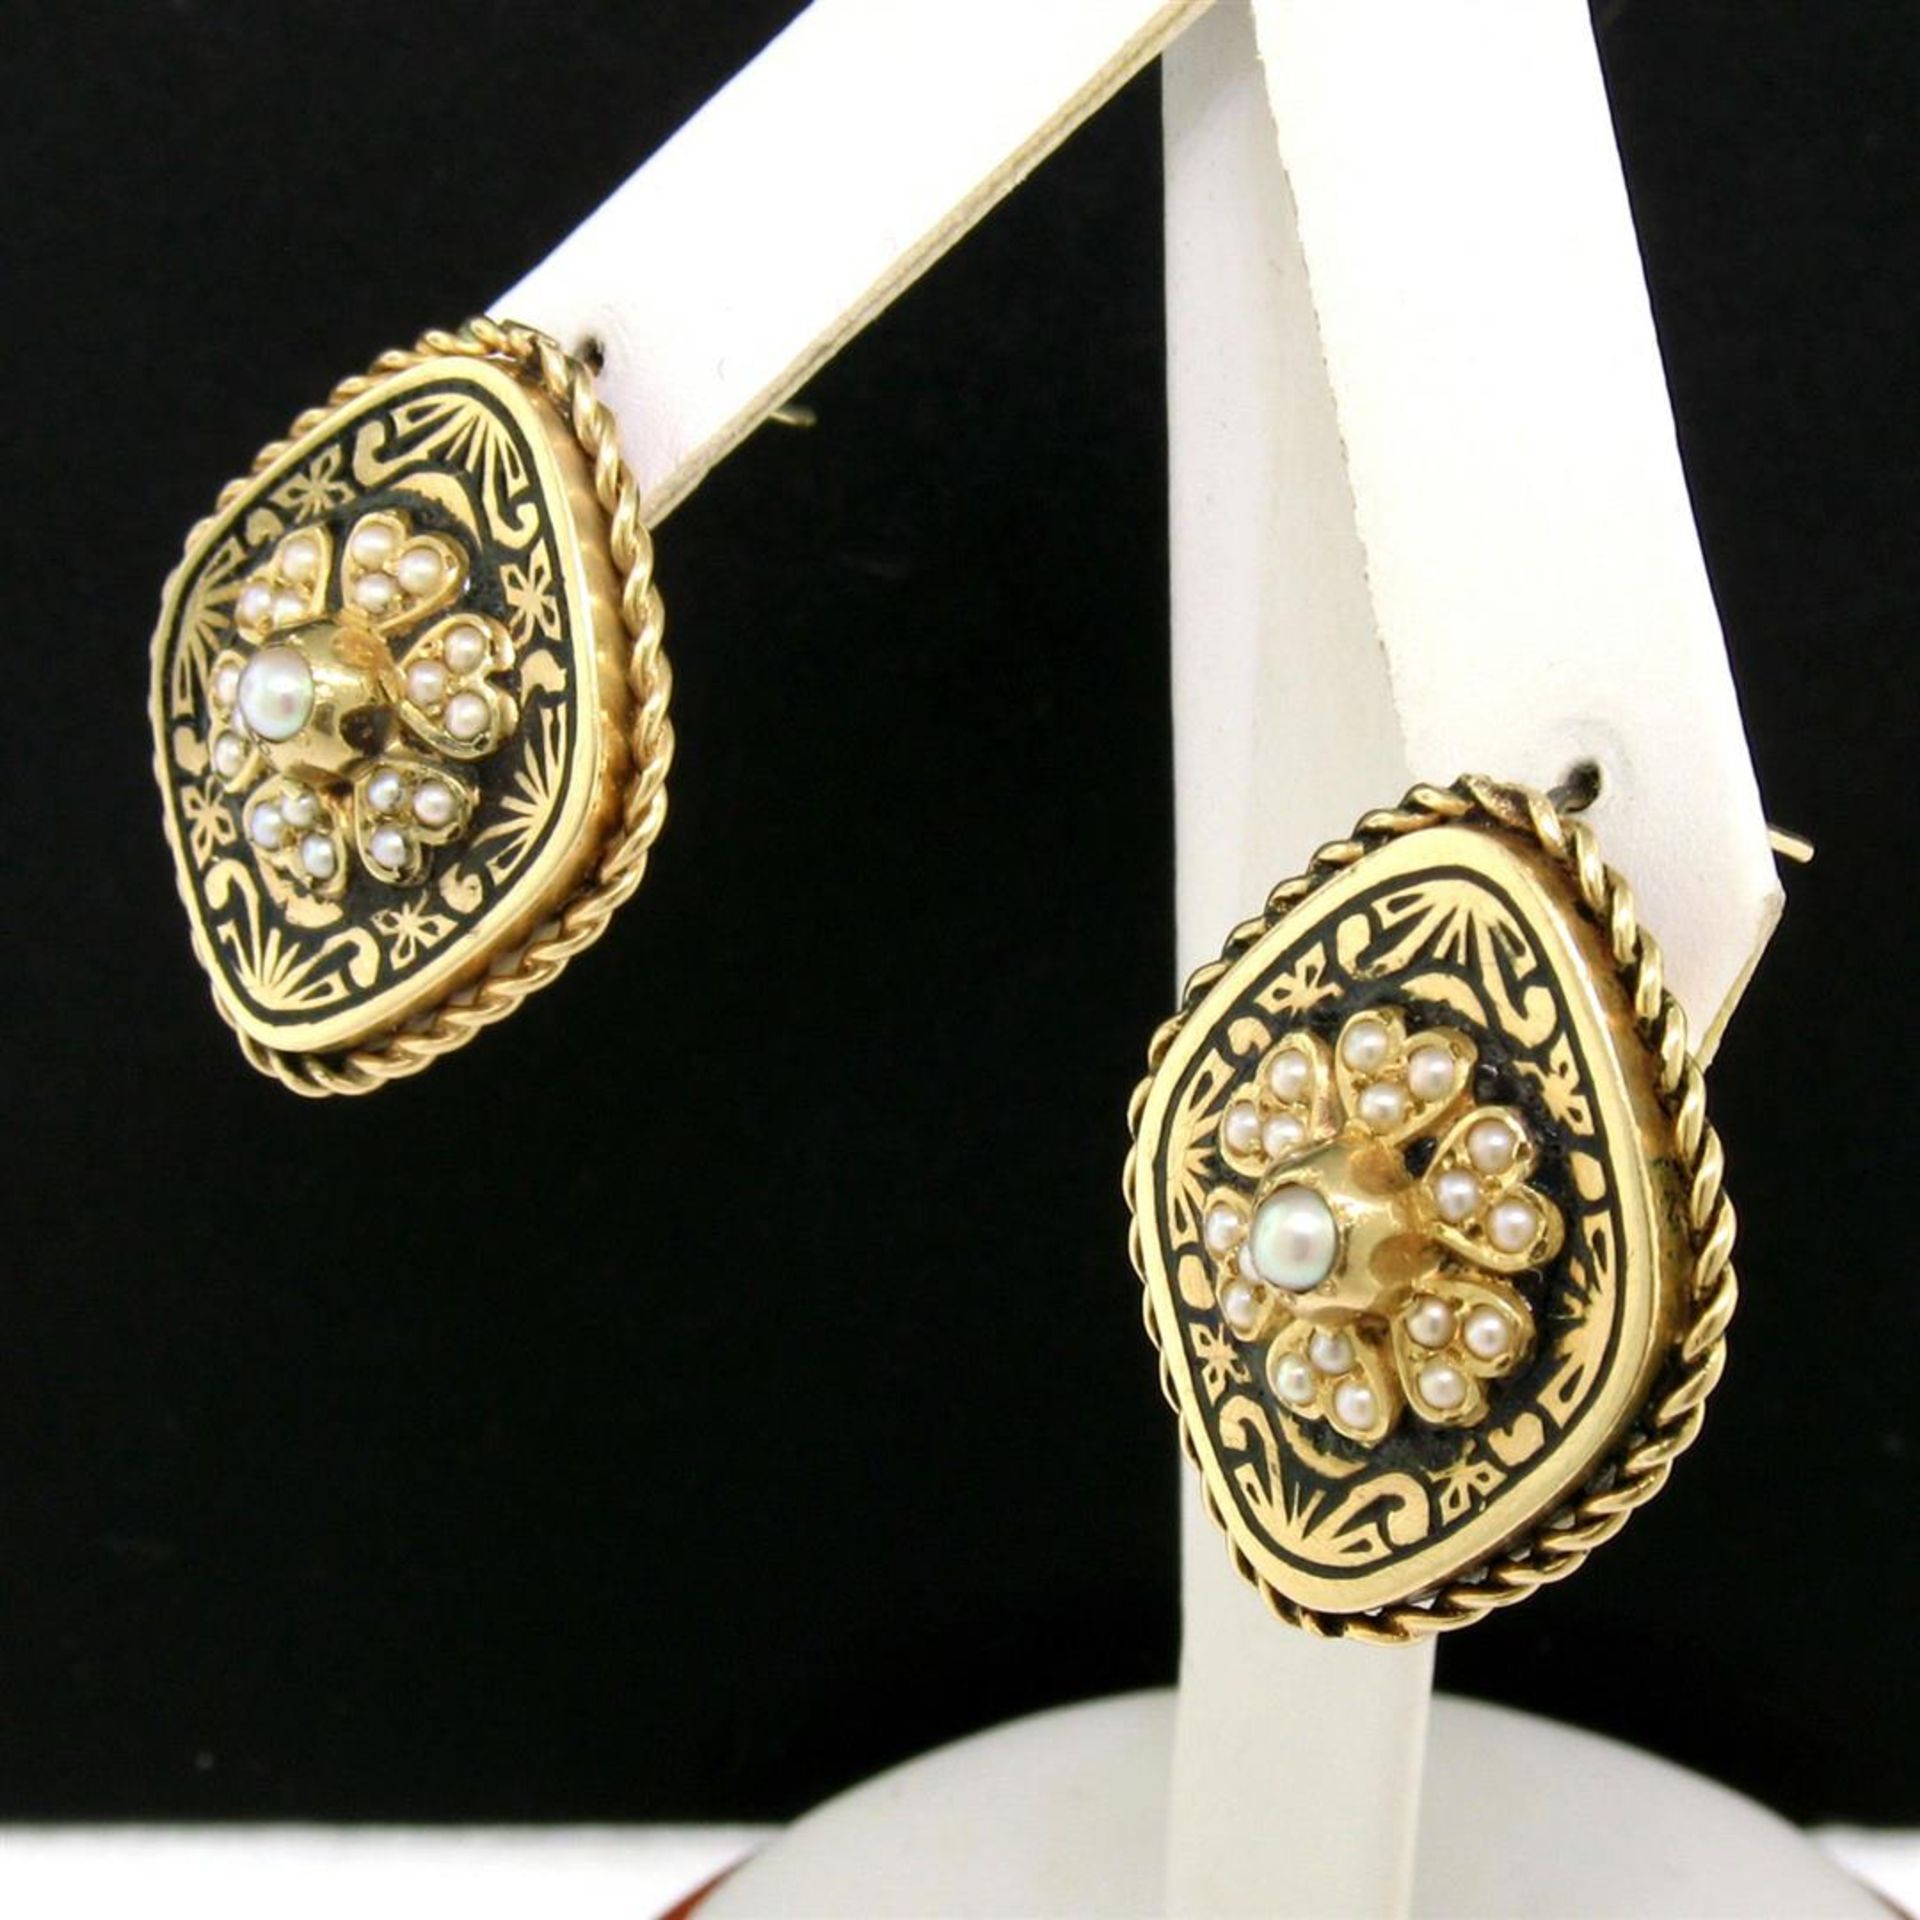 Antique Victorian 14K Gold Seed Pearl & Black Enamel Marquise Panel Earrings - Image 3 of 5